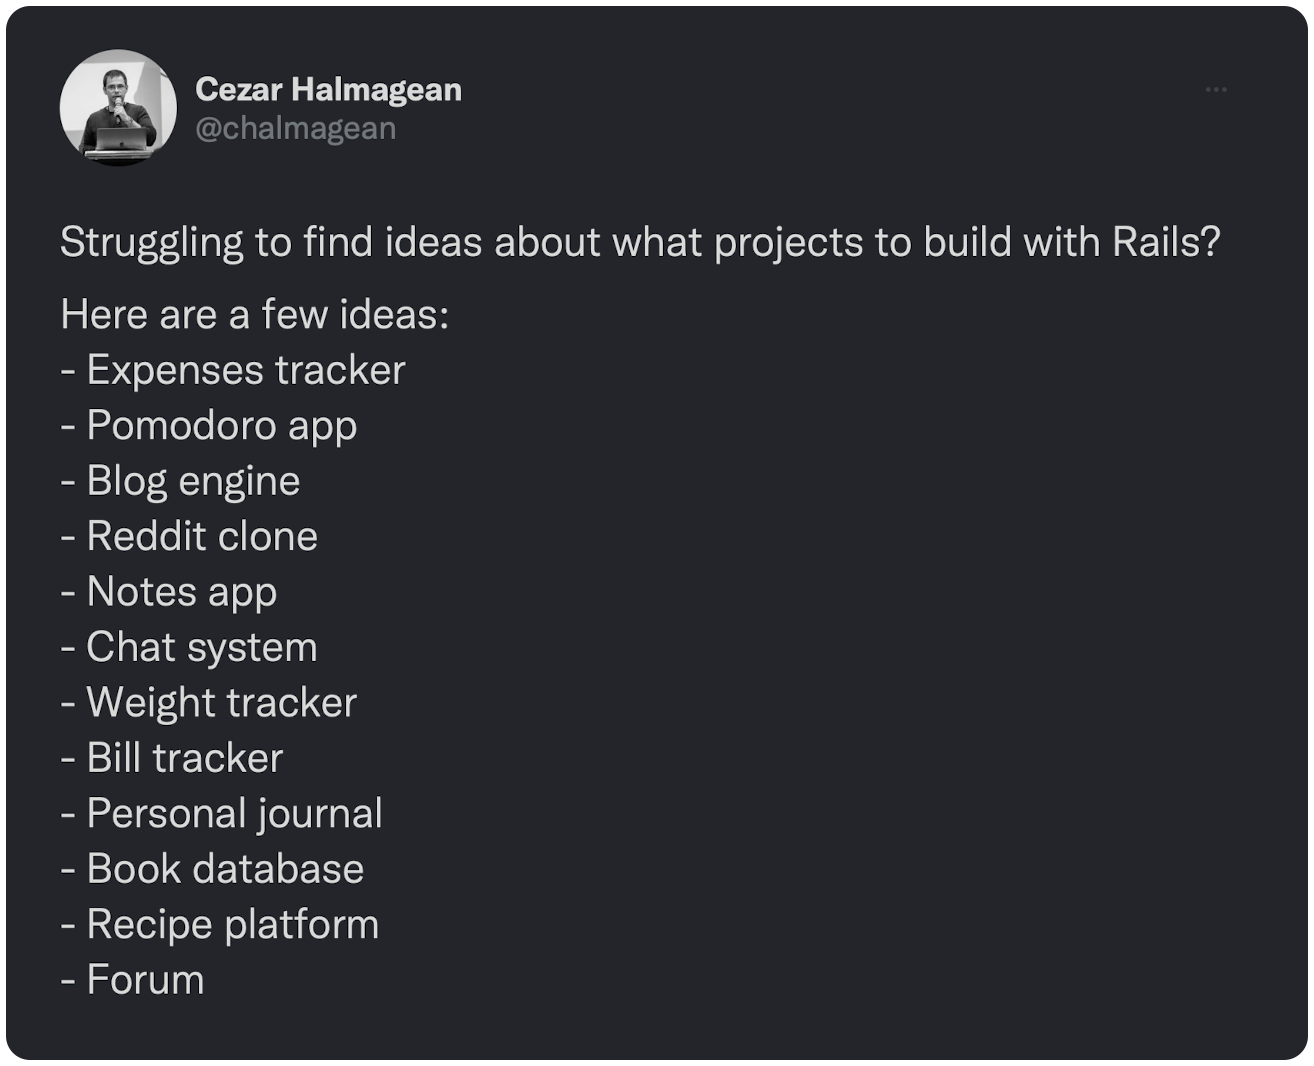 Struggling to find ideas about what projects to build with Rails? Here are a few ideas: - Expenses tracker - Pomodoro app - Blog engine - Reddit clone - Notes app - Chat system - Weight tracker - Bill tracker - Personal journal - Book database - Recipe platform - Forum